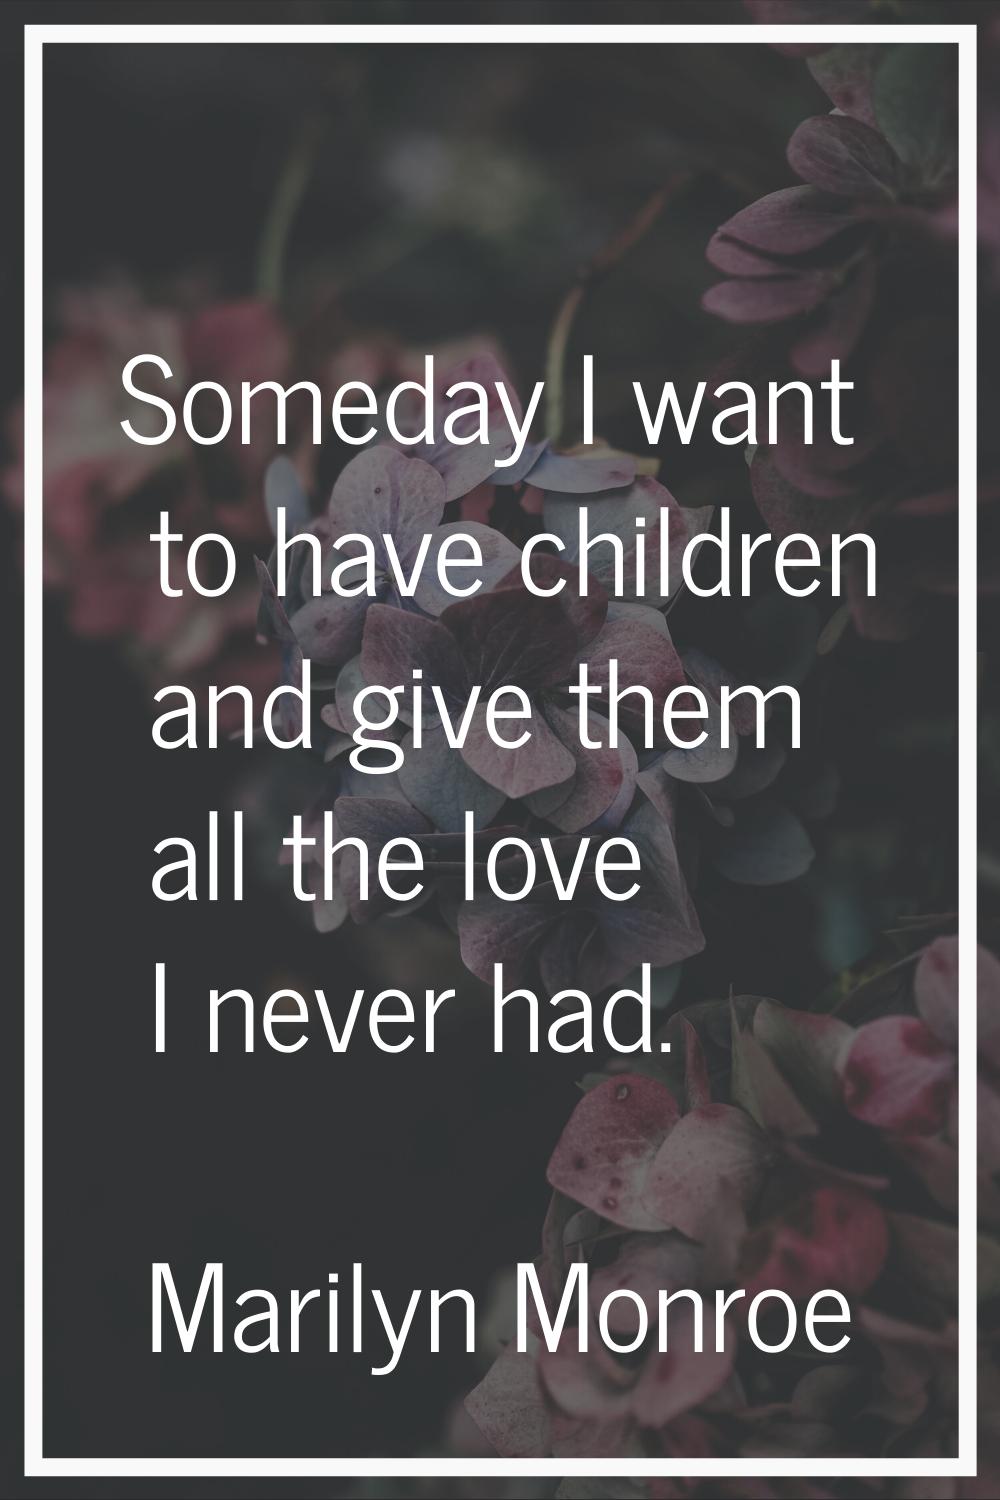 Someday I want to have children and give them all the love I never had.